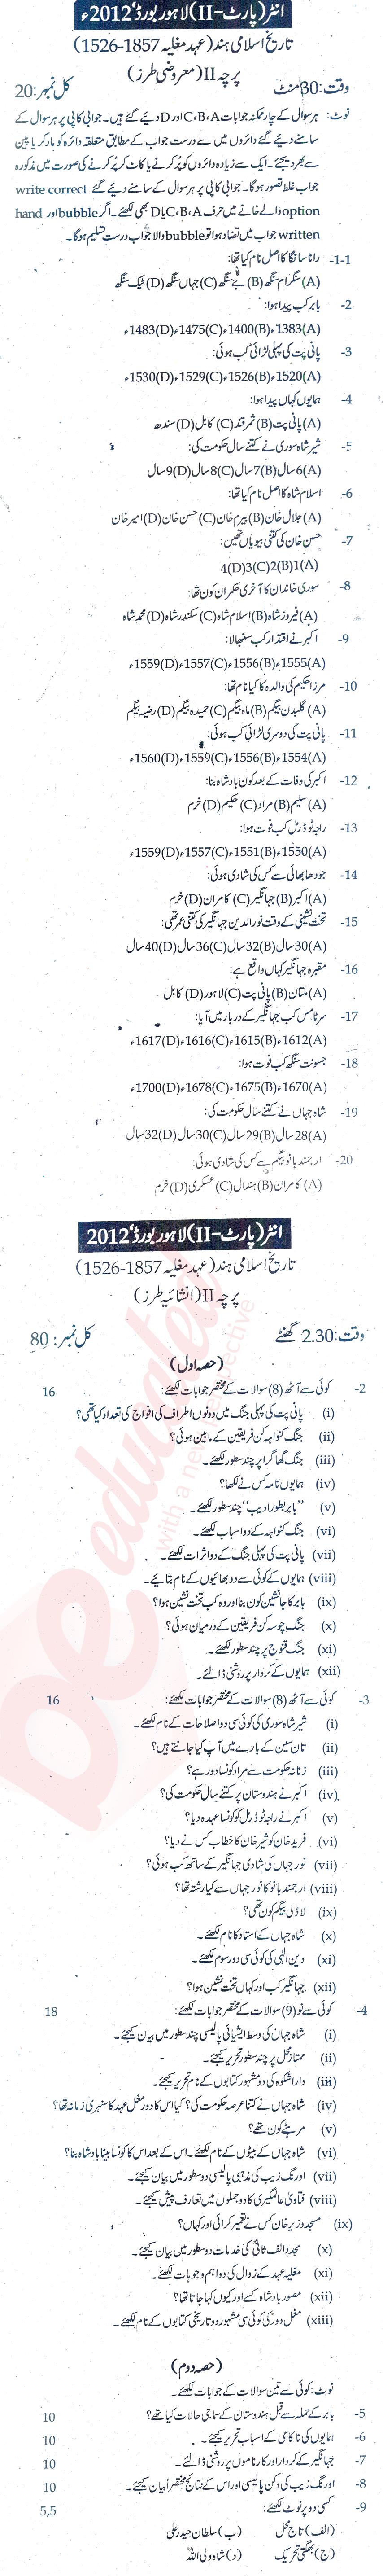 History Of Islamic India FA Part 2 Past Paper Group 1 BISE Lahore 2012